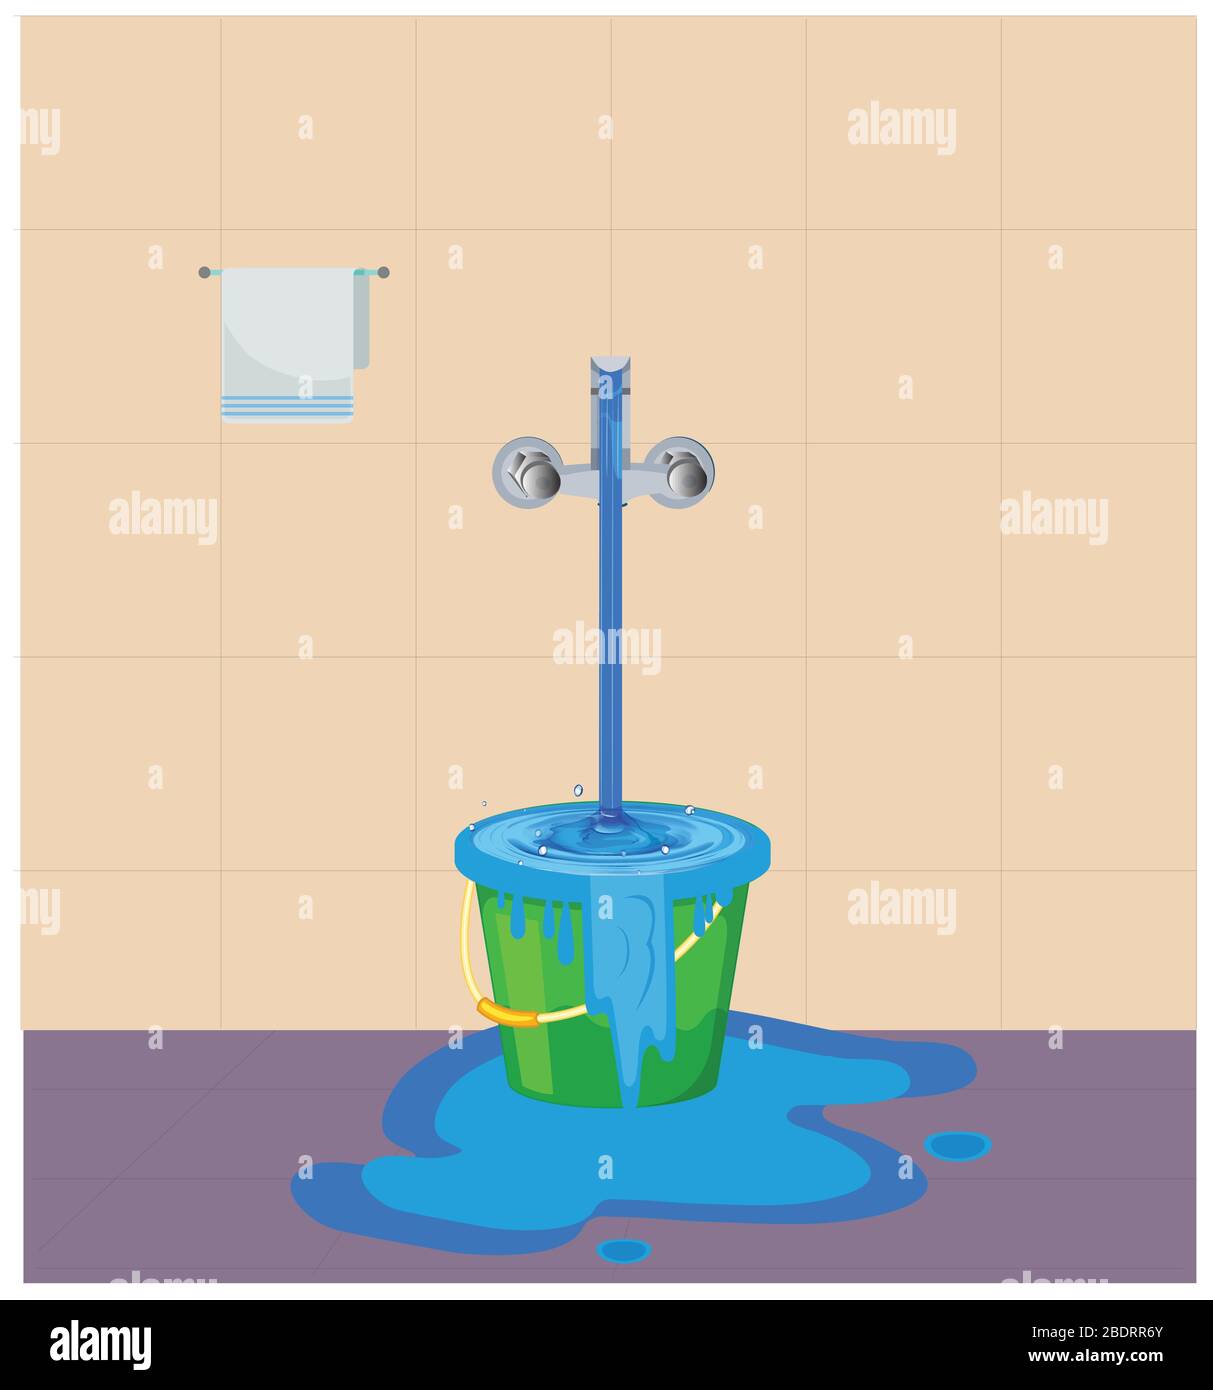 Wastage of water theme. Wastage of water from running tap as bucket is overflow with the water. Wastage of water drop from overflowing bucket and spre Stock Vector